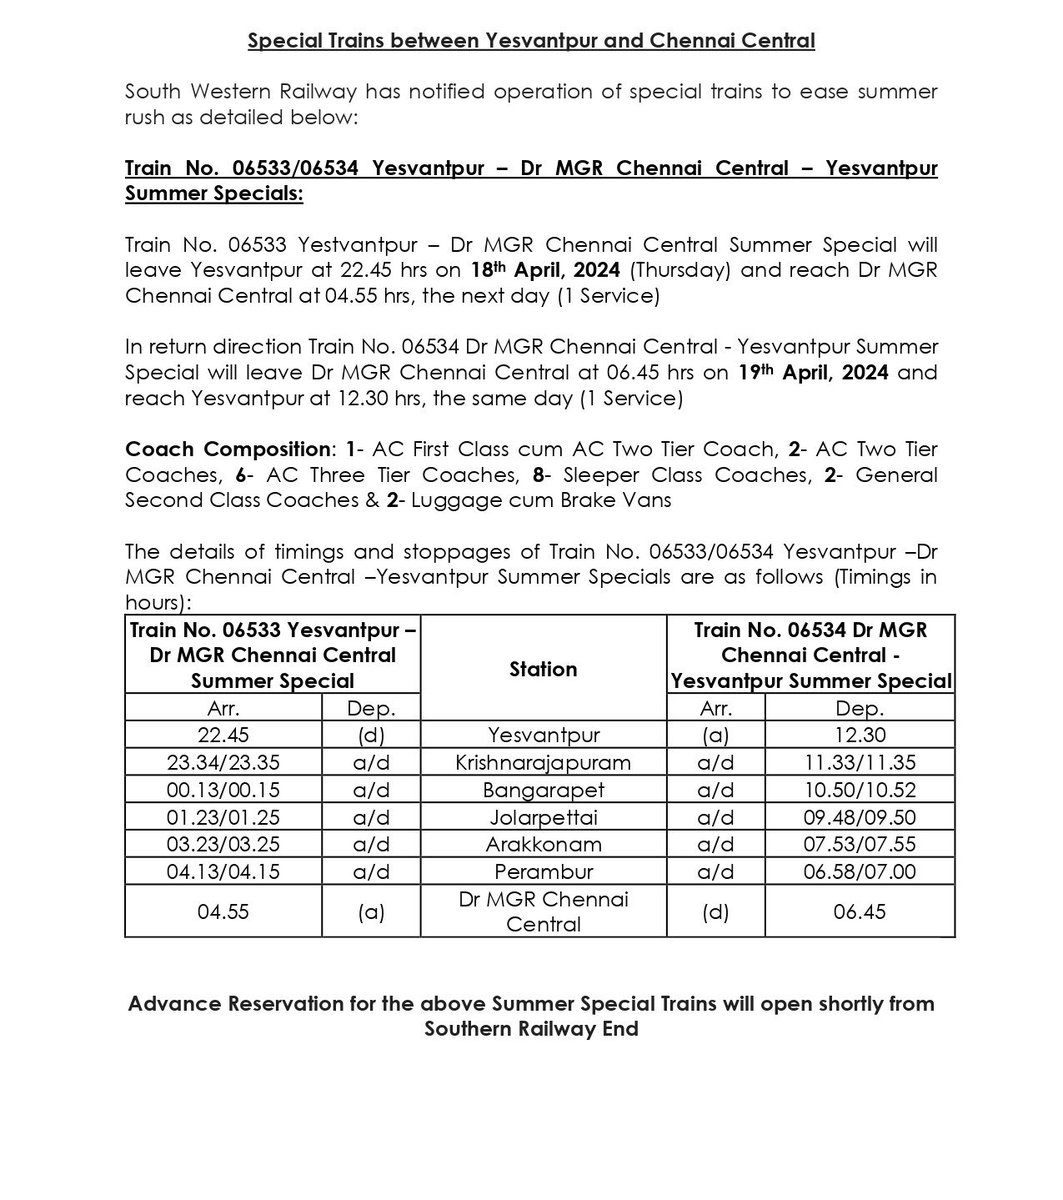 South Western Railway has notified the operation of #SpecialTrains between #Yesvantpur and #Chennai Central to ease the summer rush. Advance Reservations will open shortly from #SouthernRailway Railway End. Passengers, kindly take note and plan your journey. #RailwayAlert